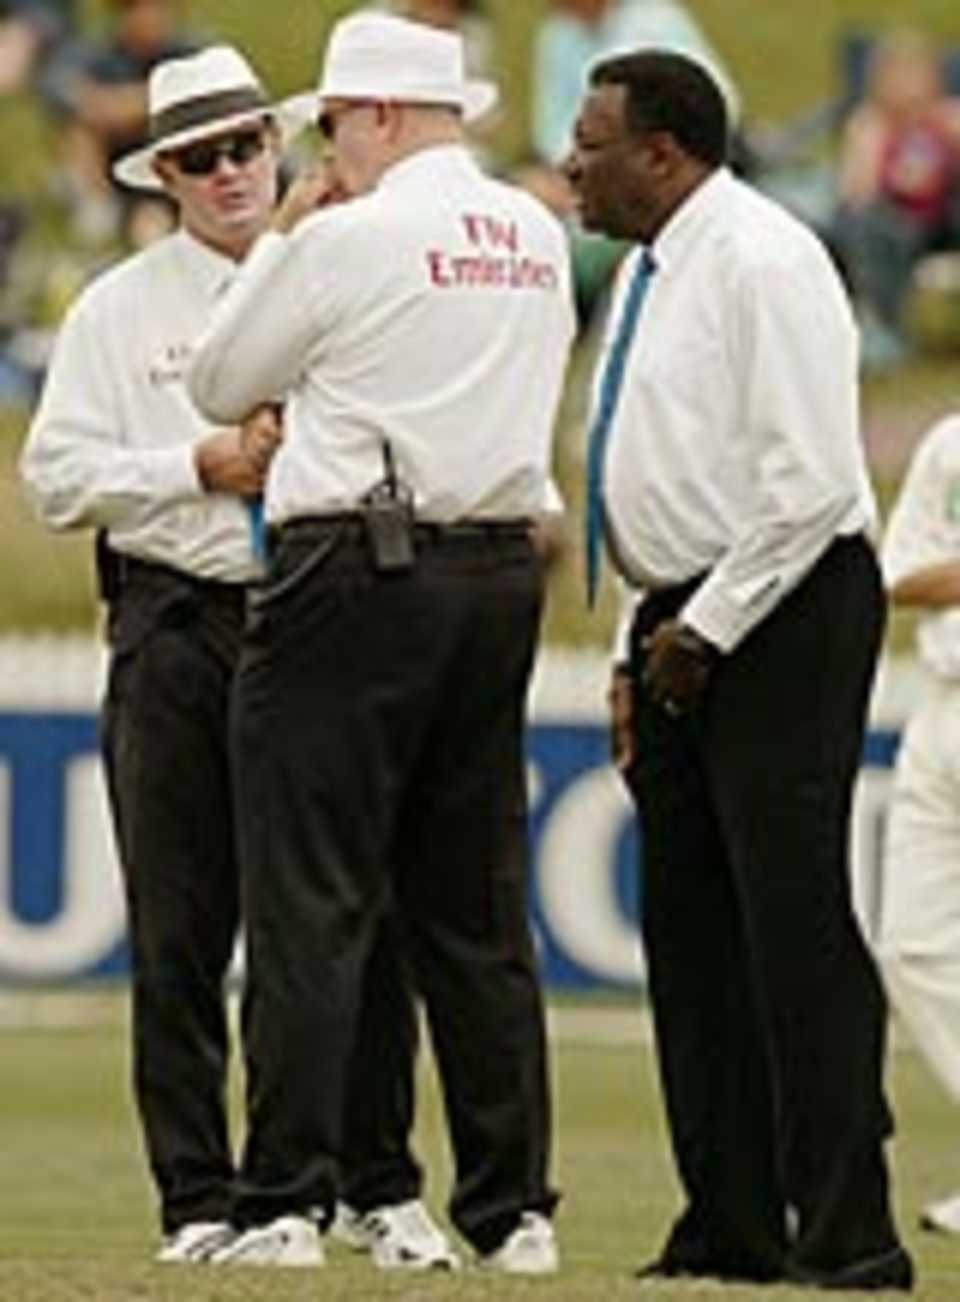 Clive Lloyd discusses the state of the pitch with umpires Russel Tiffin and Steve Davis